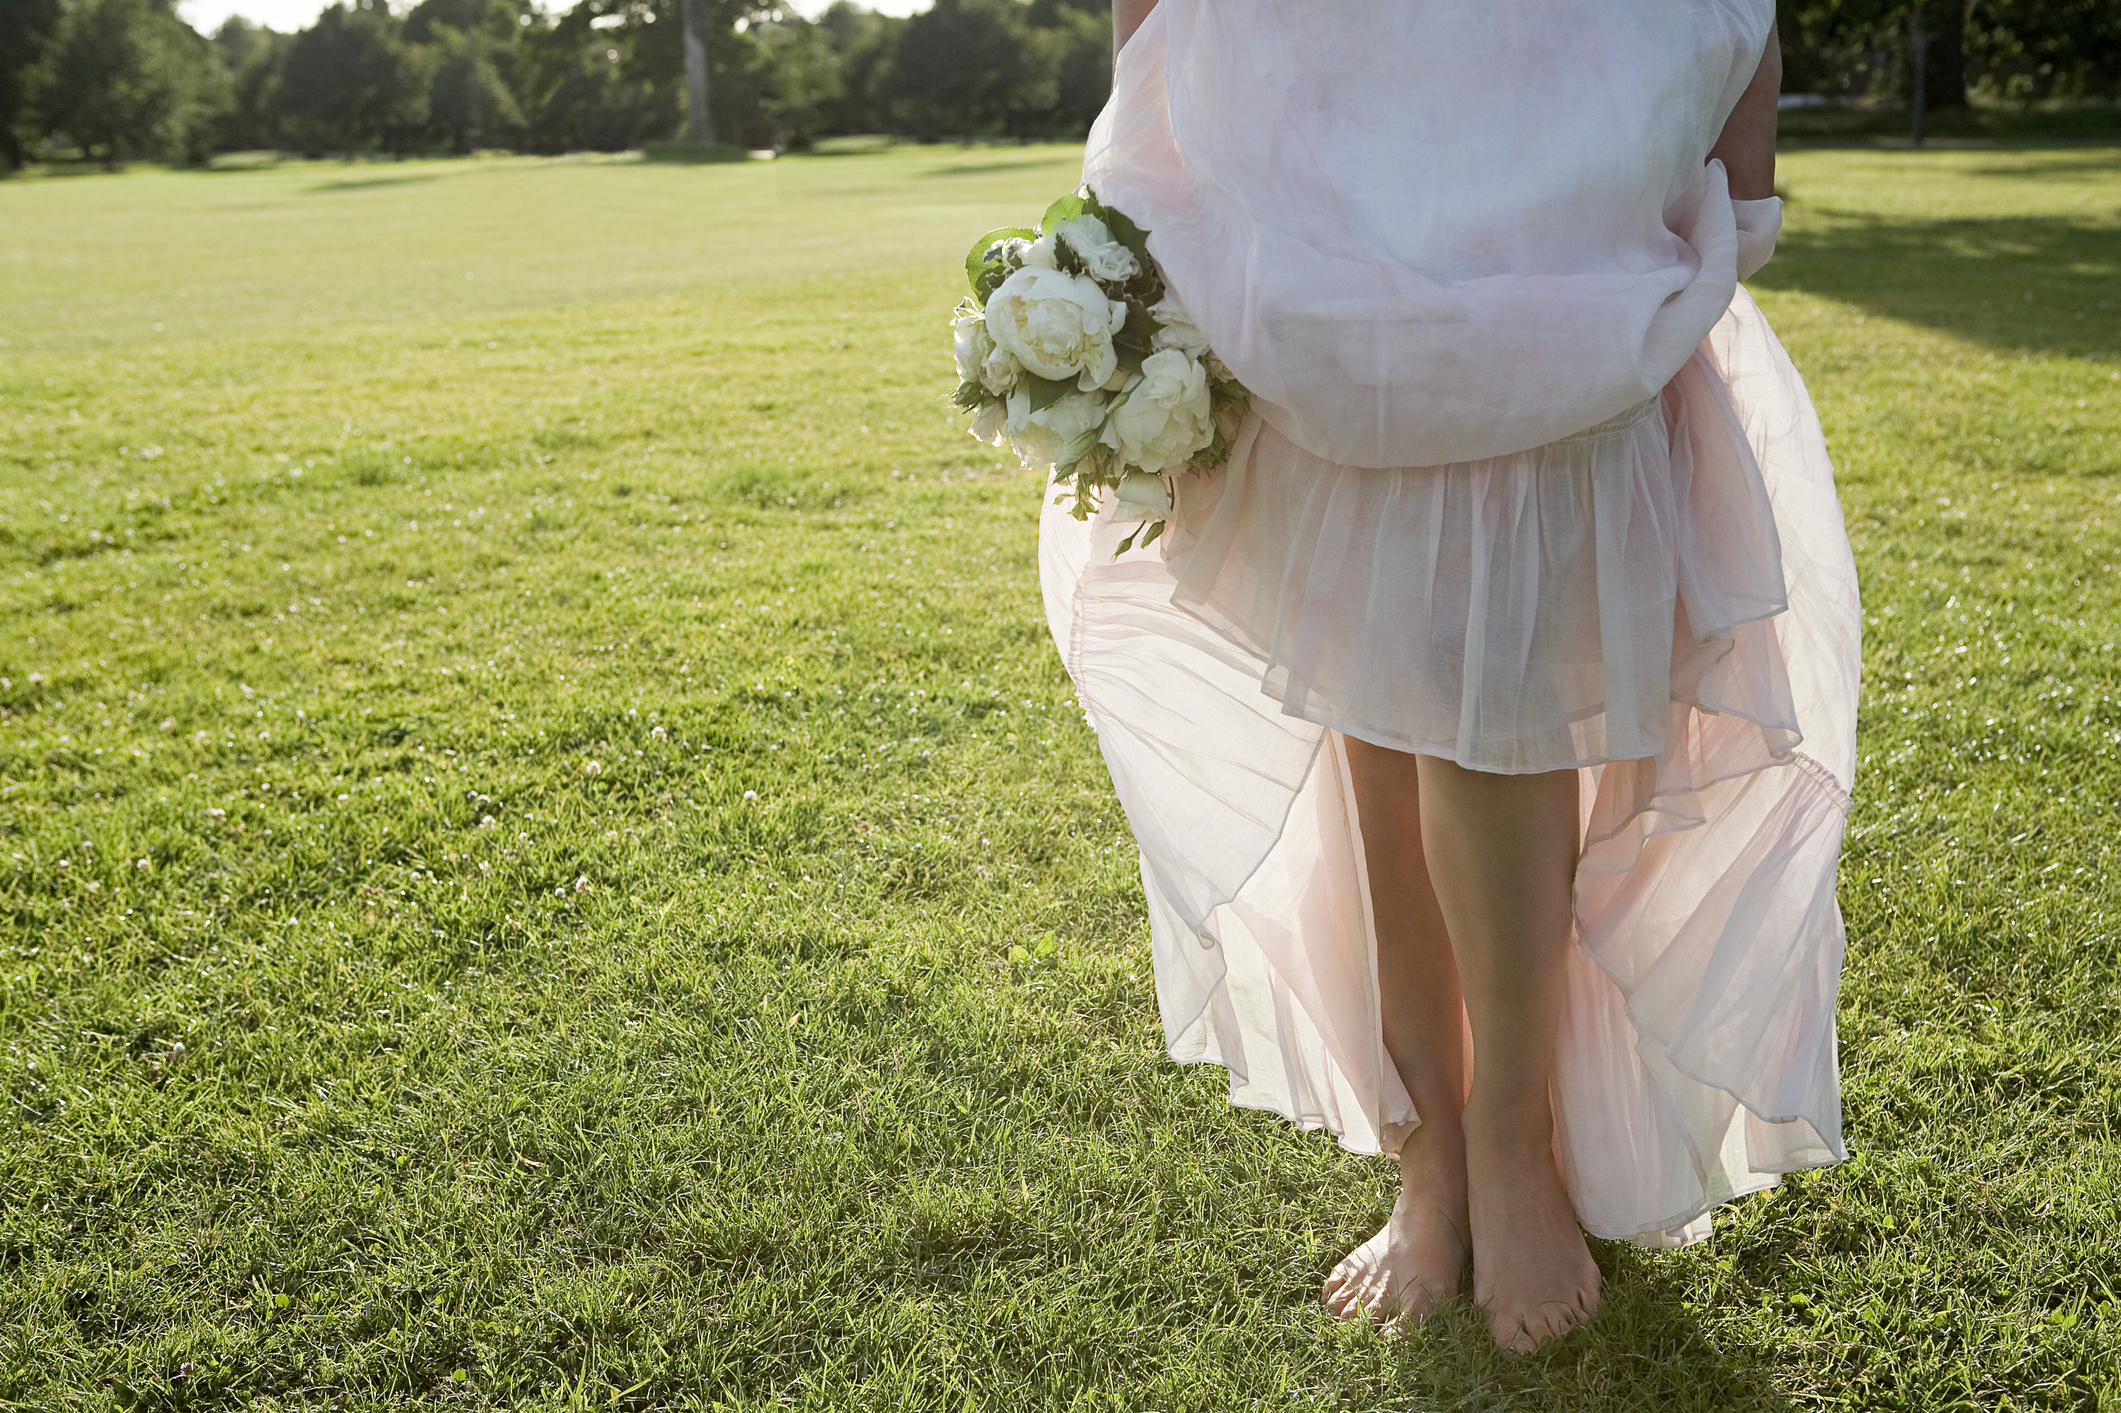 Person in a wedding dress holding a bouquet, standing barefoot on grass